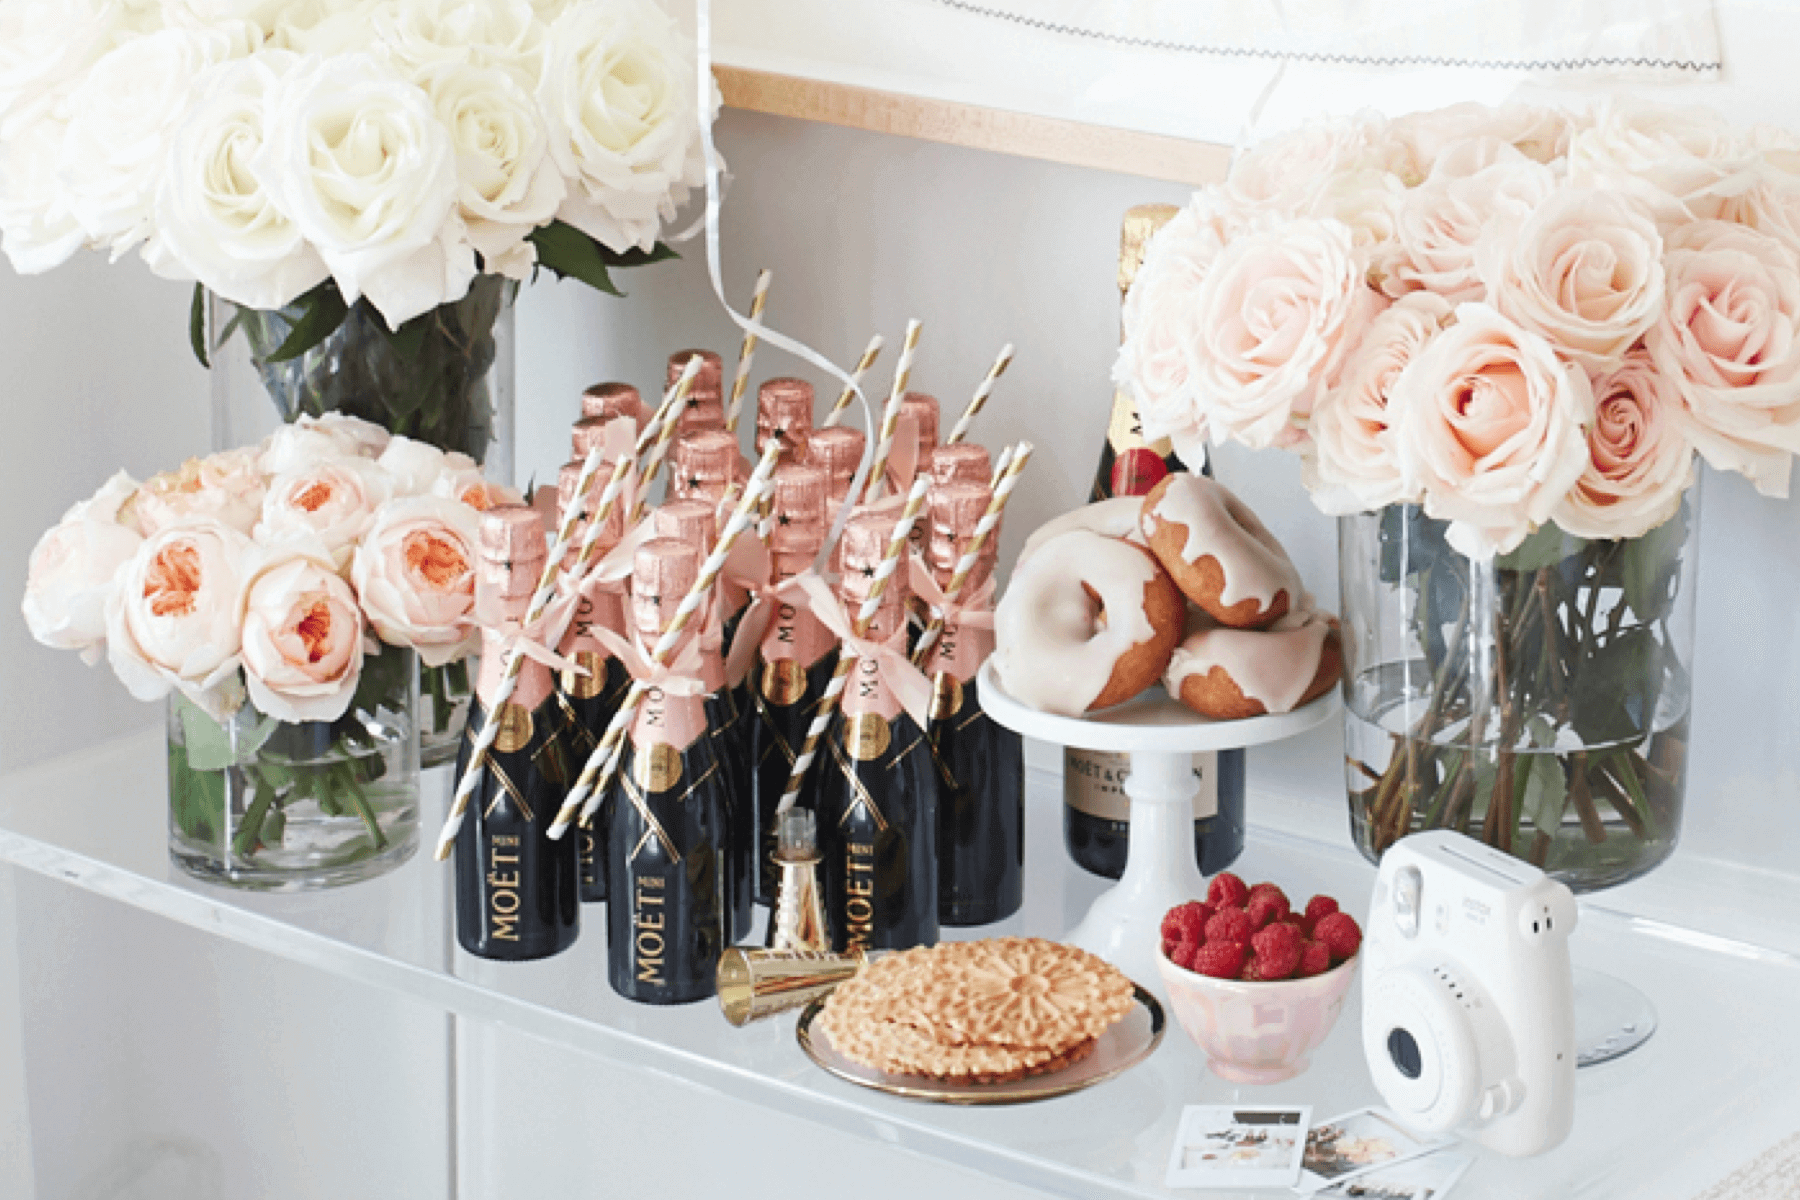 How to Plan an Unforgettable Bridal Shower